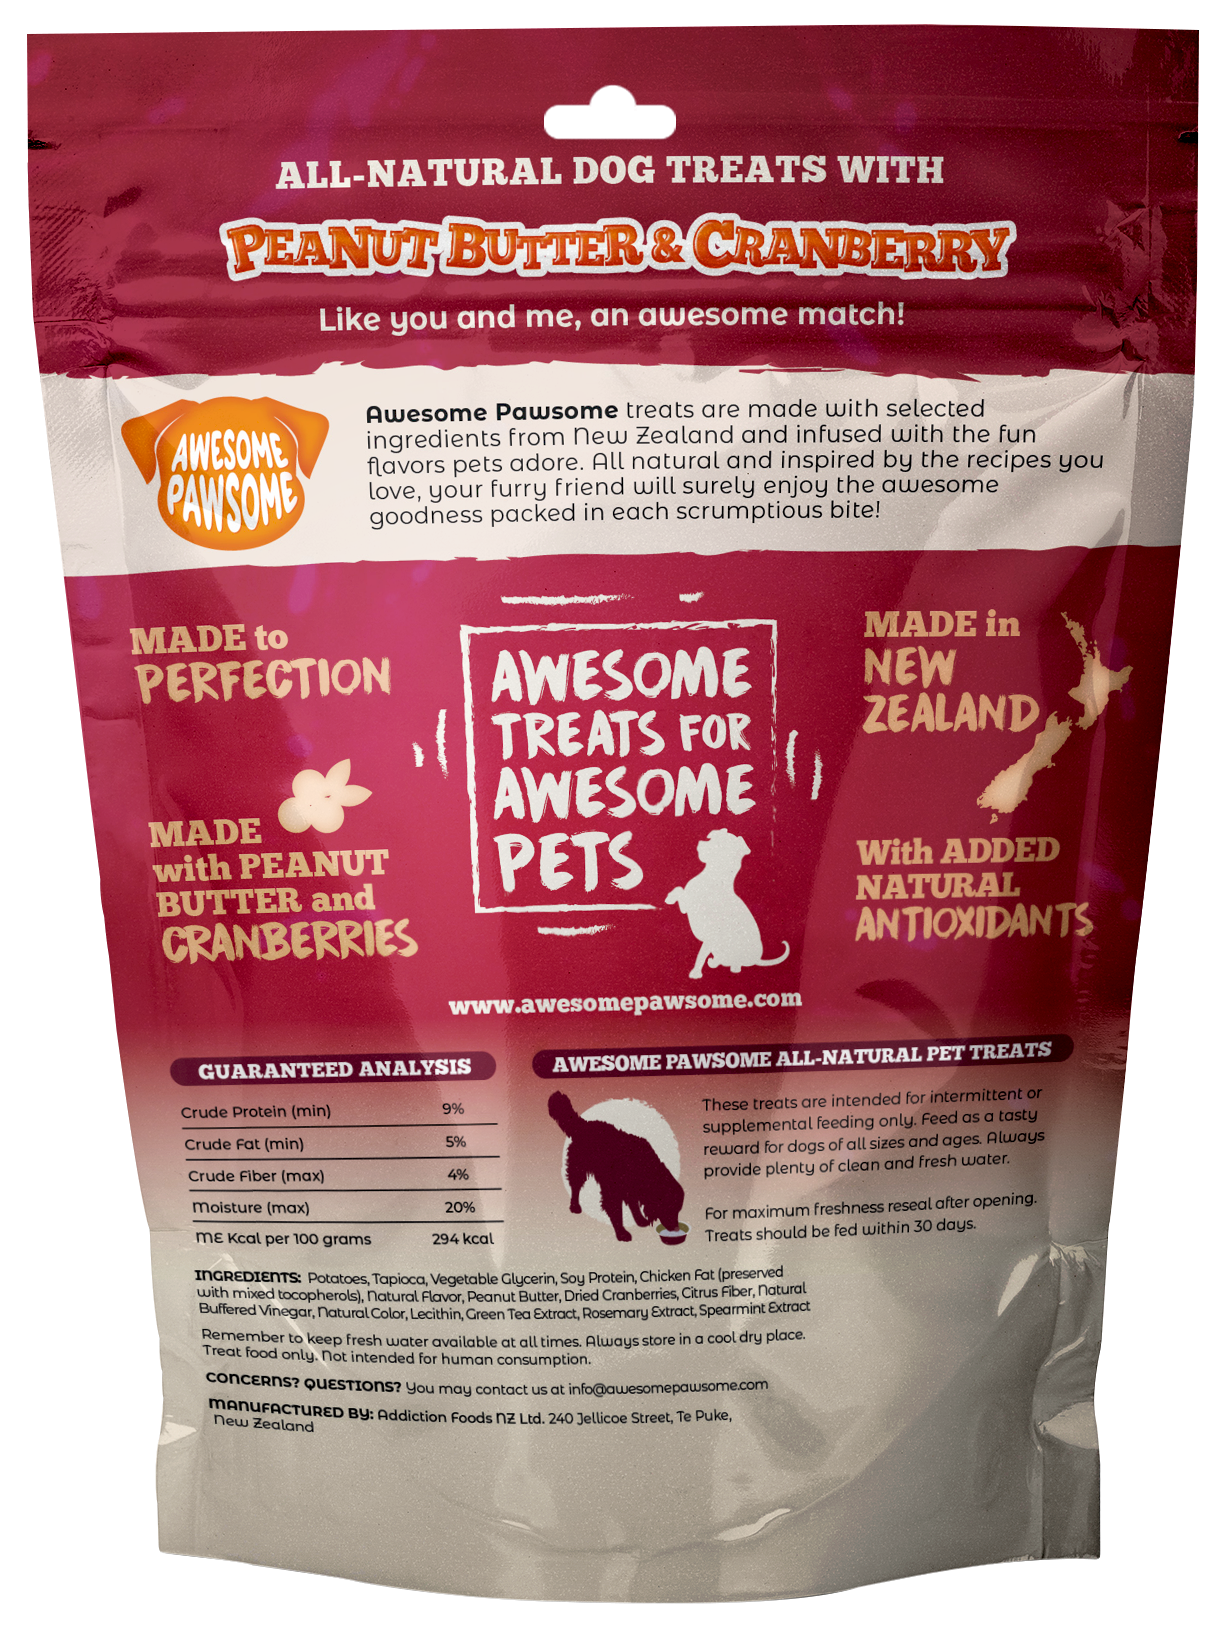 Awesome Pawsome Peanut Butter and Cranberry